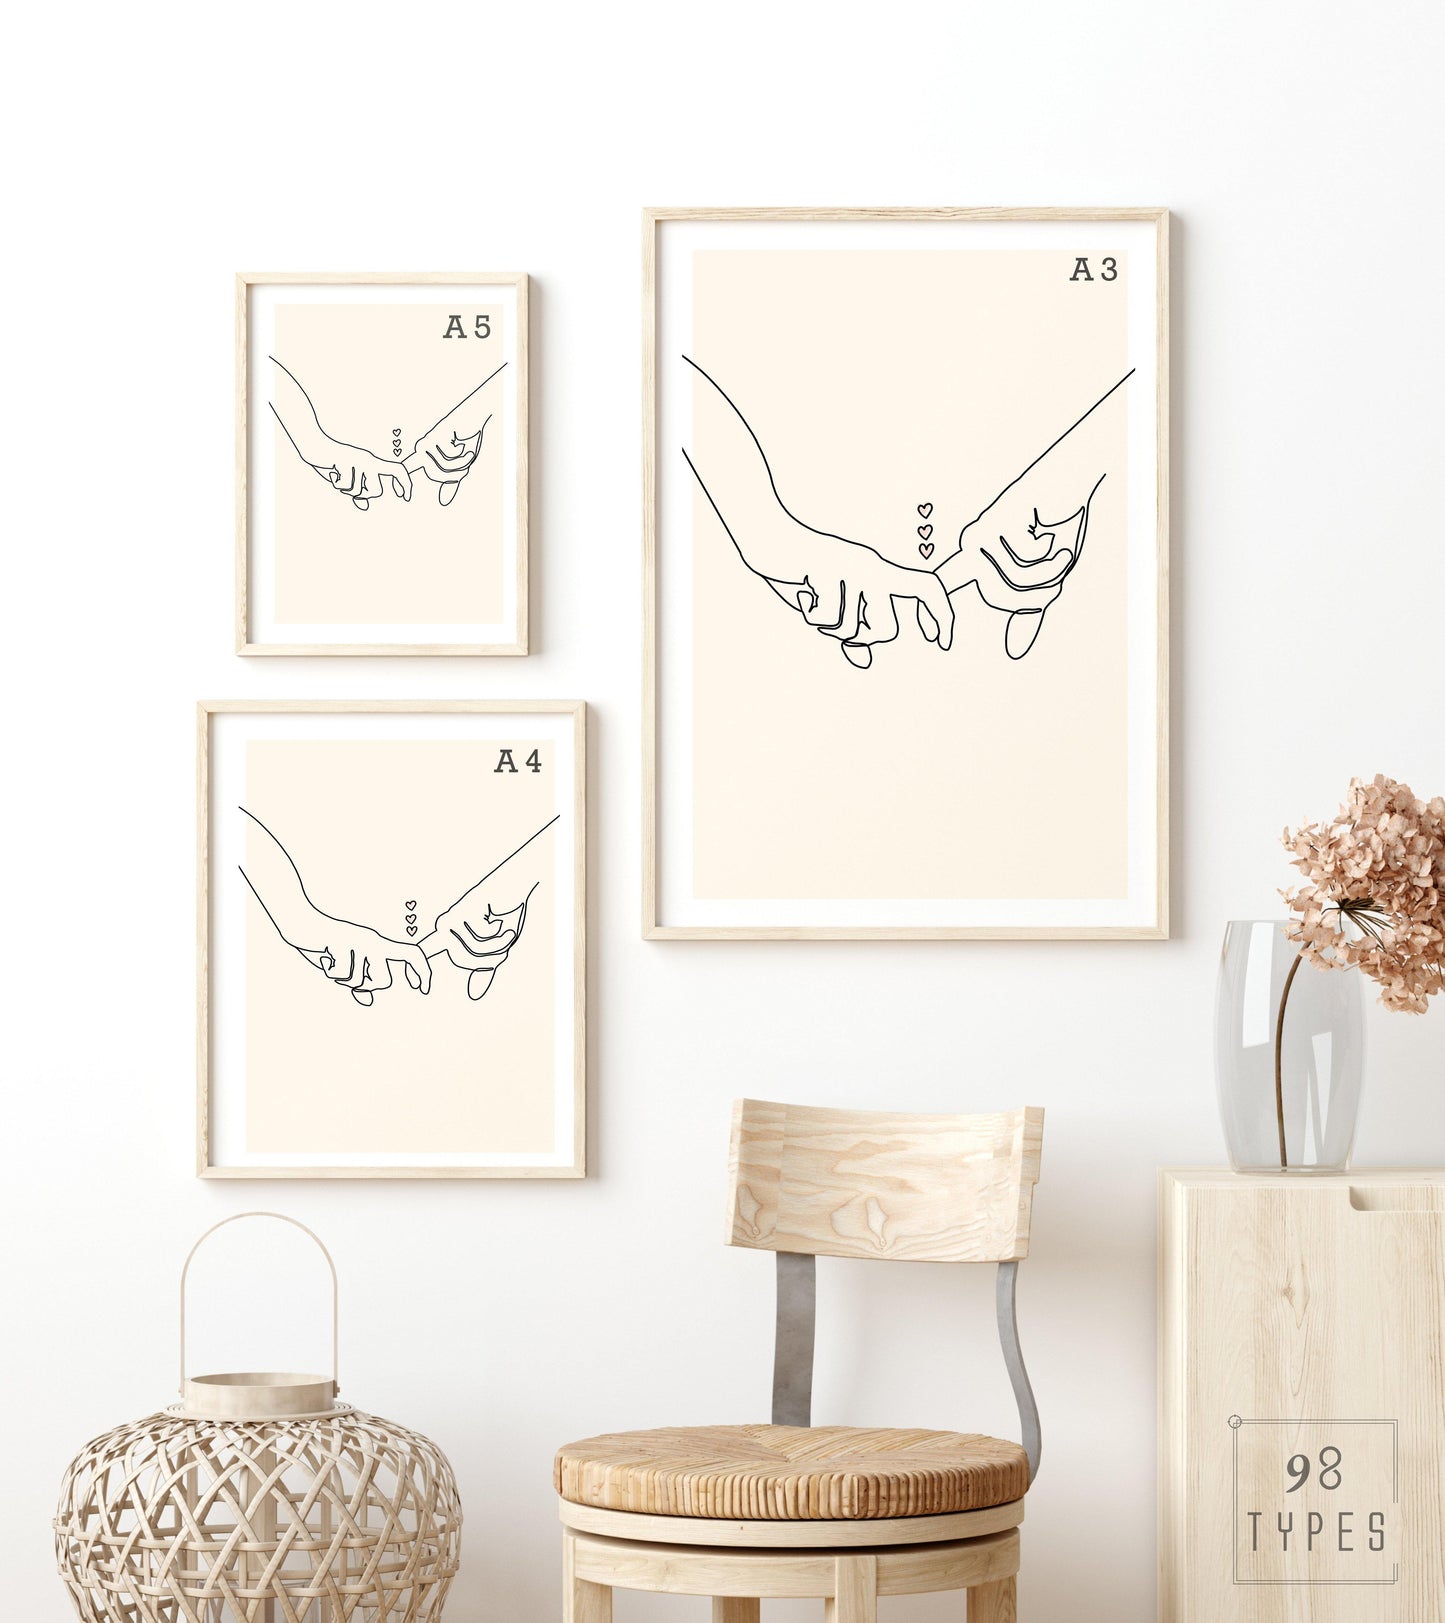 You and Me Alone Line Art Print | Contemporary Minimal Wall Decor | Scandi Design Style - 98types